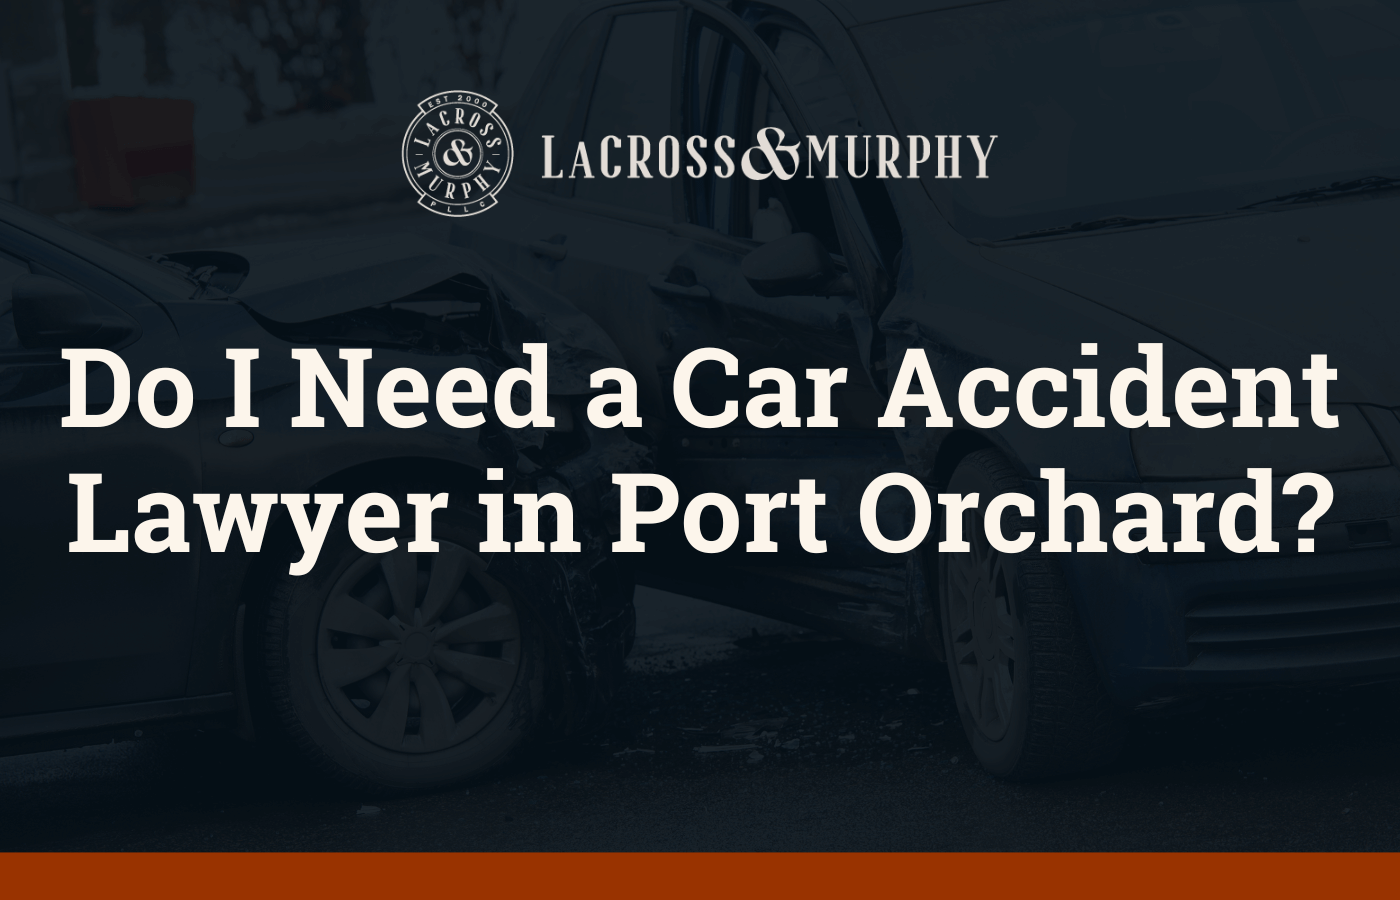 Do I Need a Car Accident Lawyer in Port Orchard?